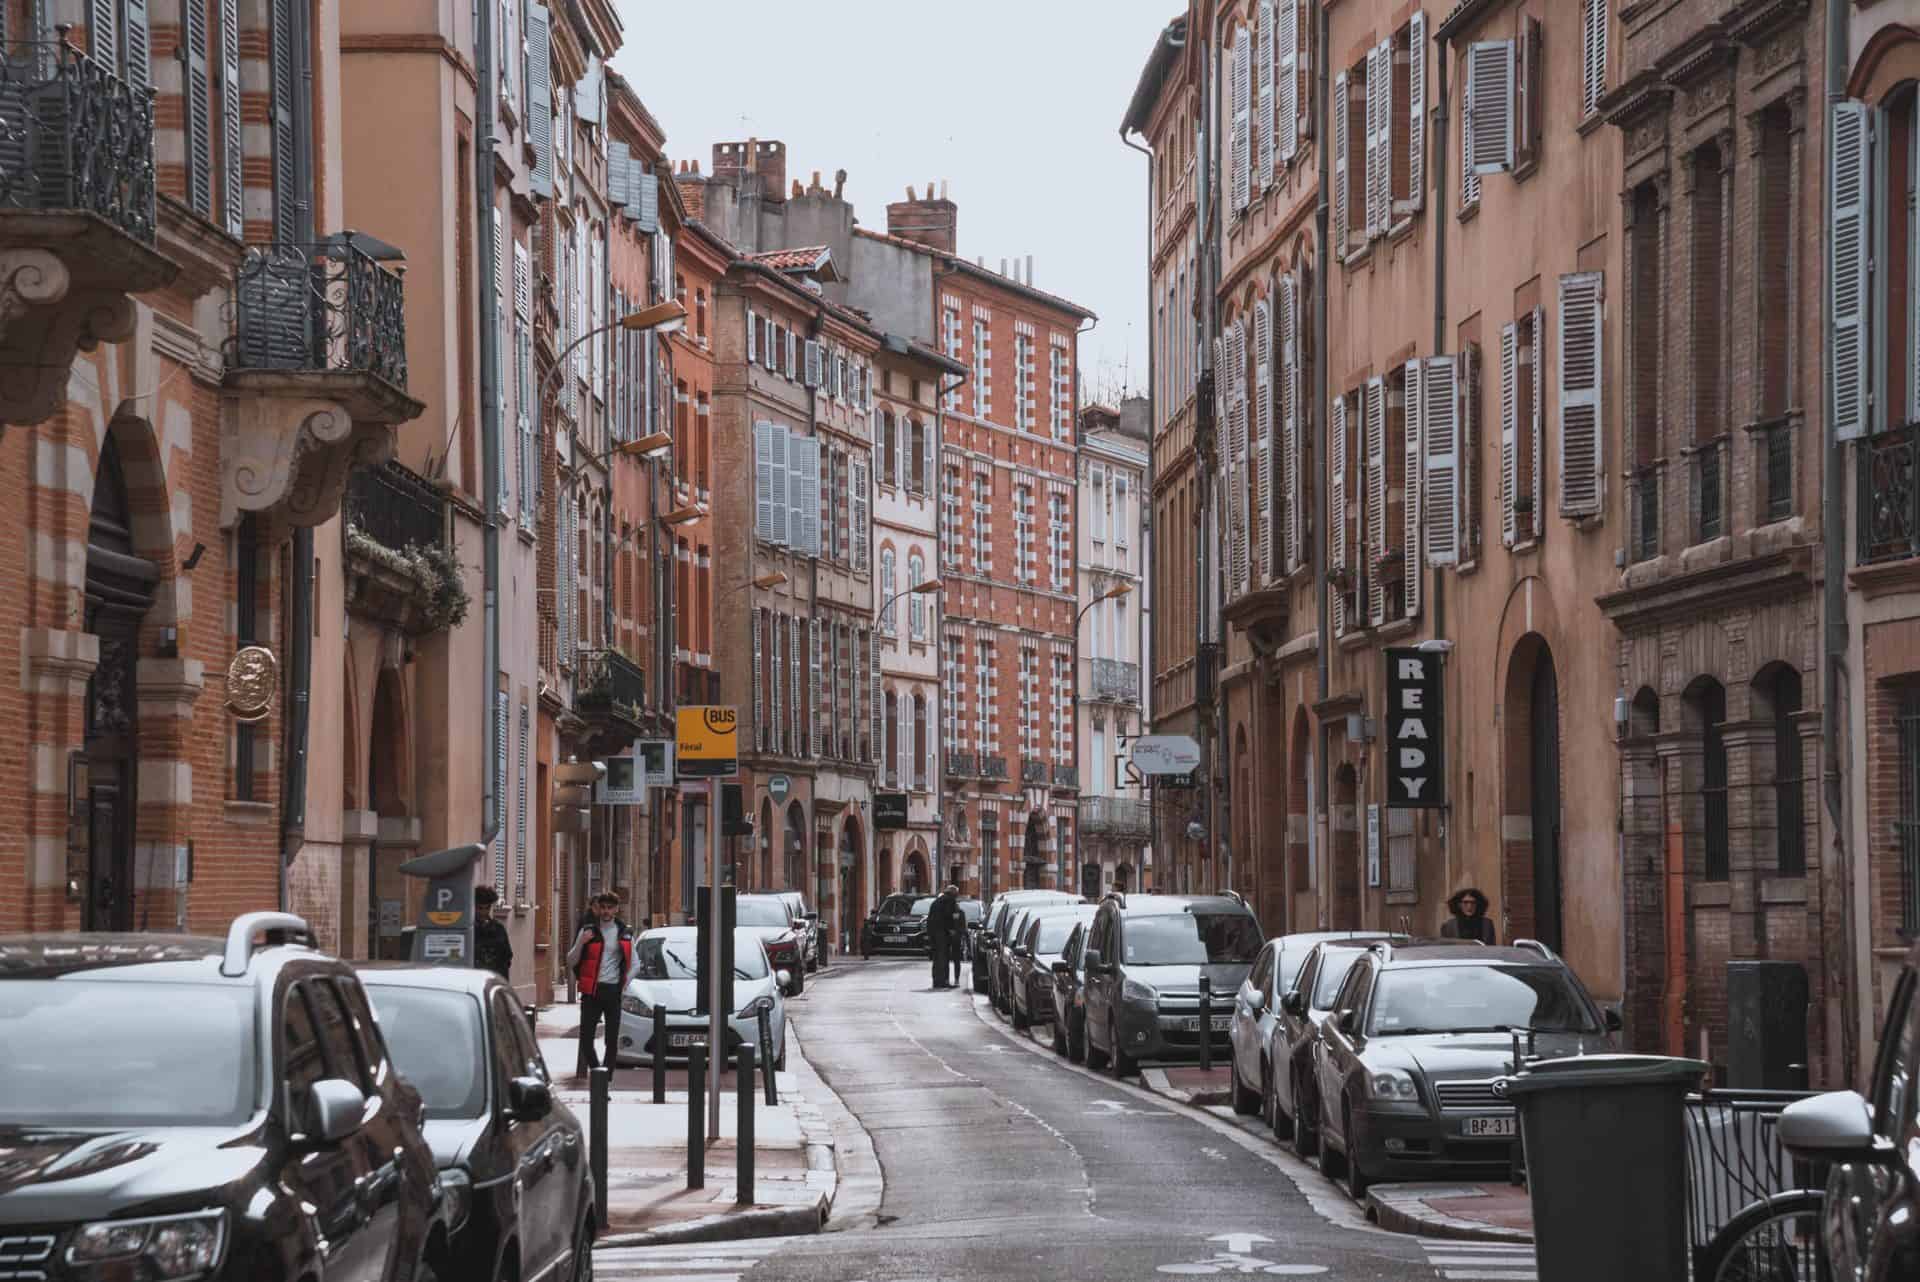 A street view photo of the famous pink and red buildings of Toulouse